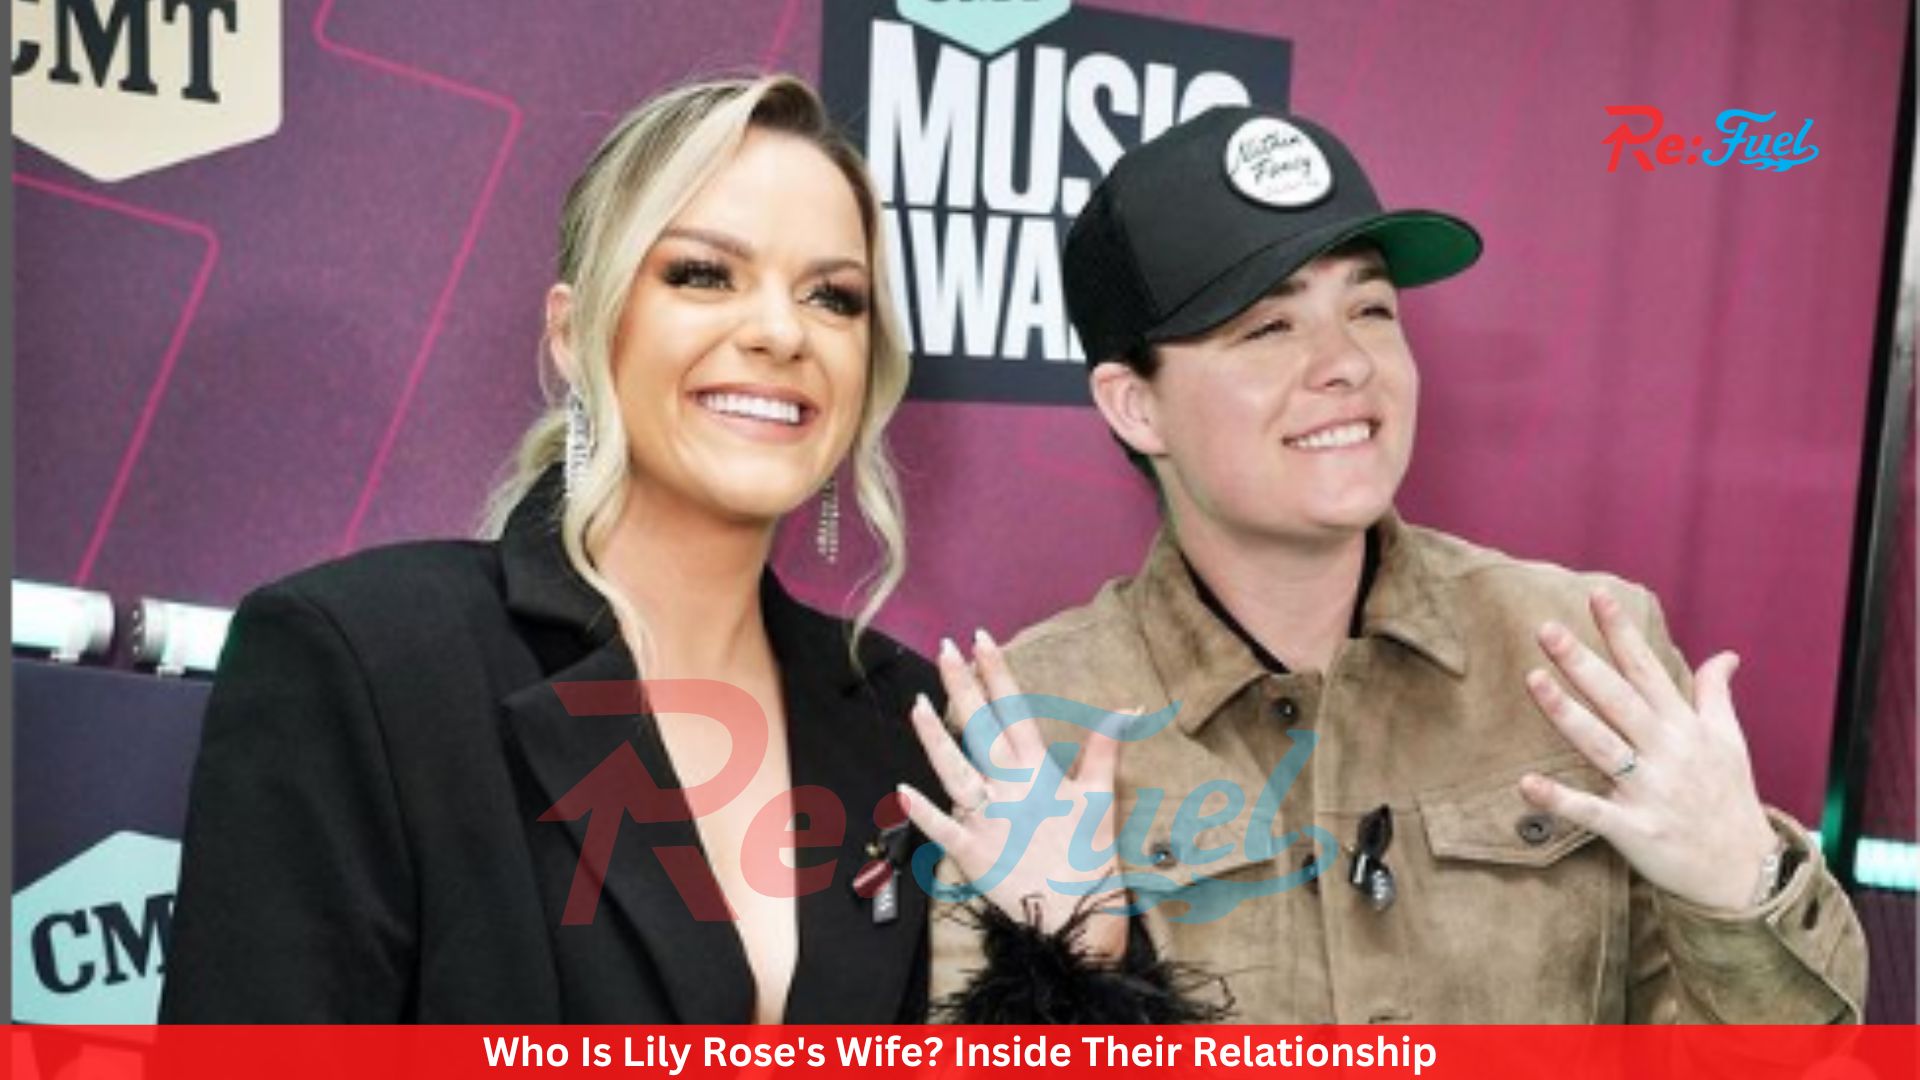 Who Is Lily Rose's Wife? Inside Their Relationship